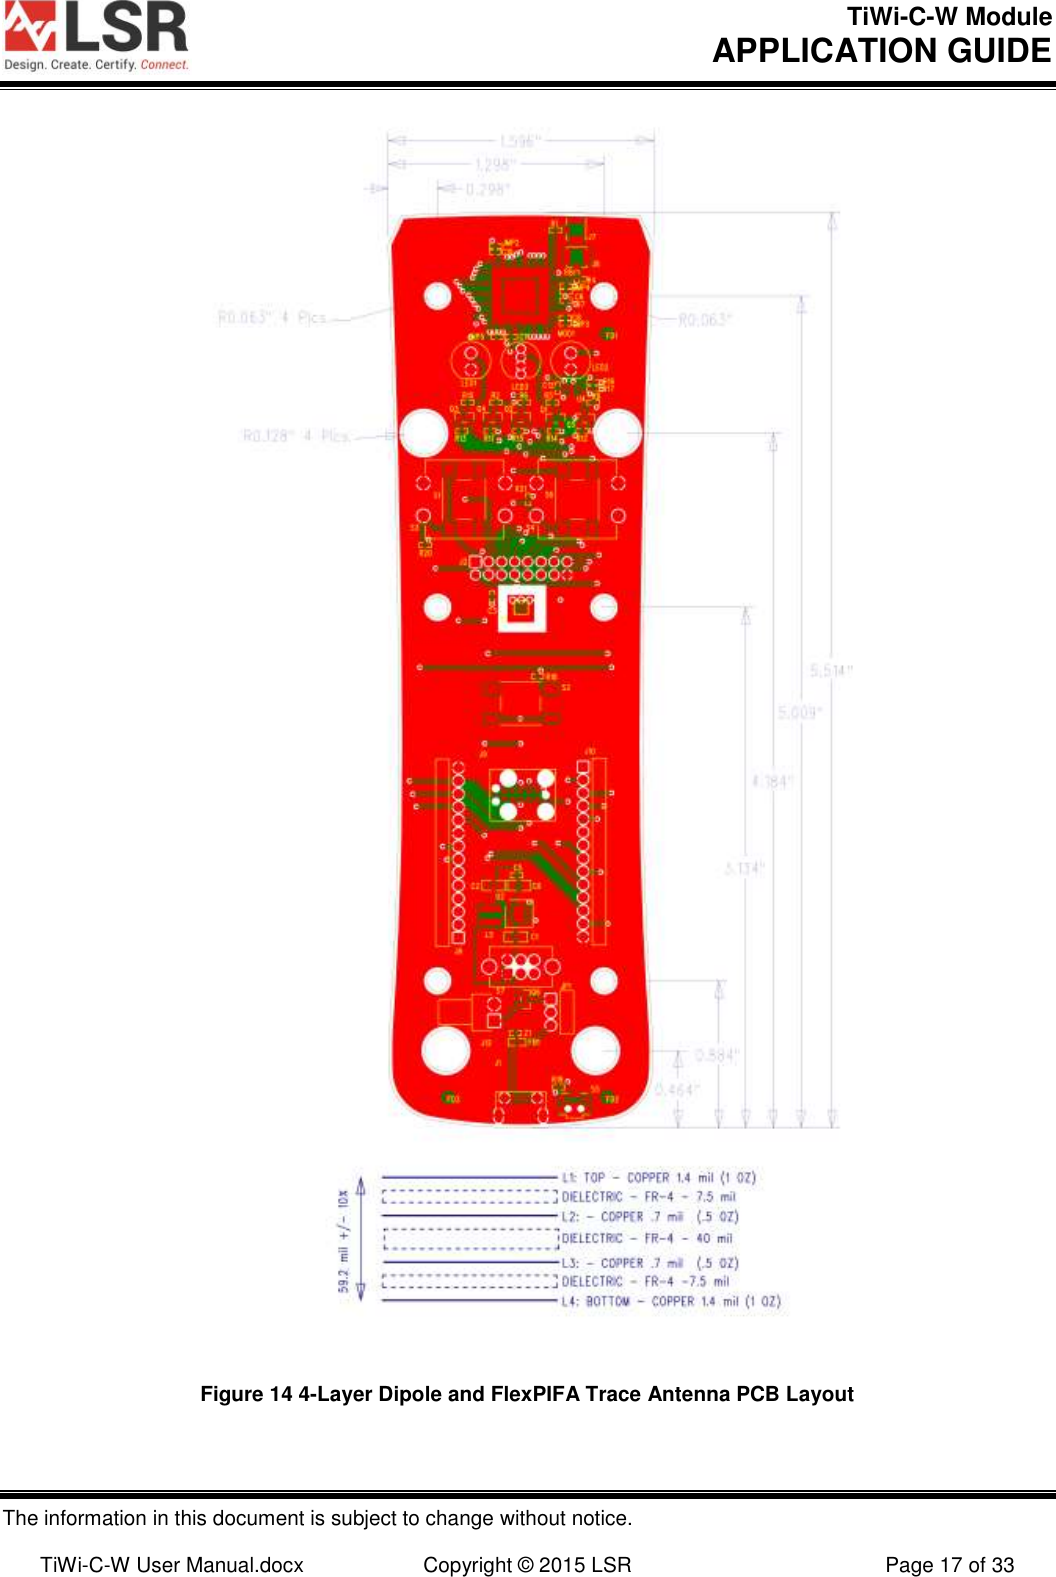 TiWi-C-W Module       APPLICATION GUIDE  The information in this document is subject to change without notice.  TiWi-C-W User Manual.docx  Copyright © 2015 LSR  Page 17 of 33  Figure 14 4-Layer Dipole and FlexPIFA Trace Antenna PCB Layout